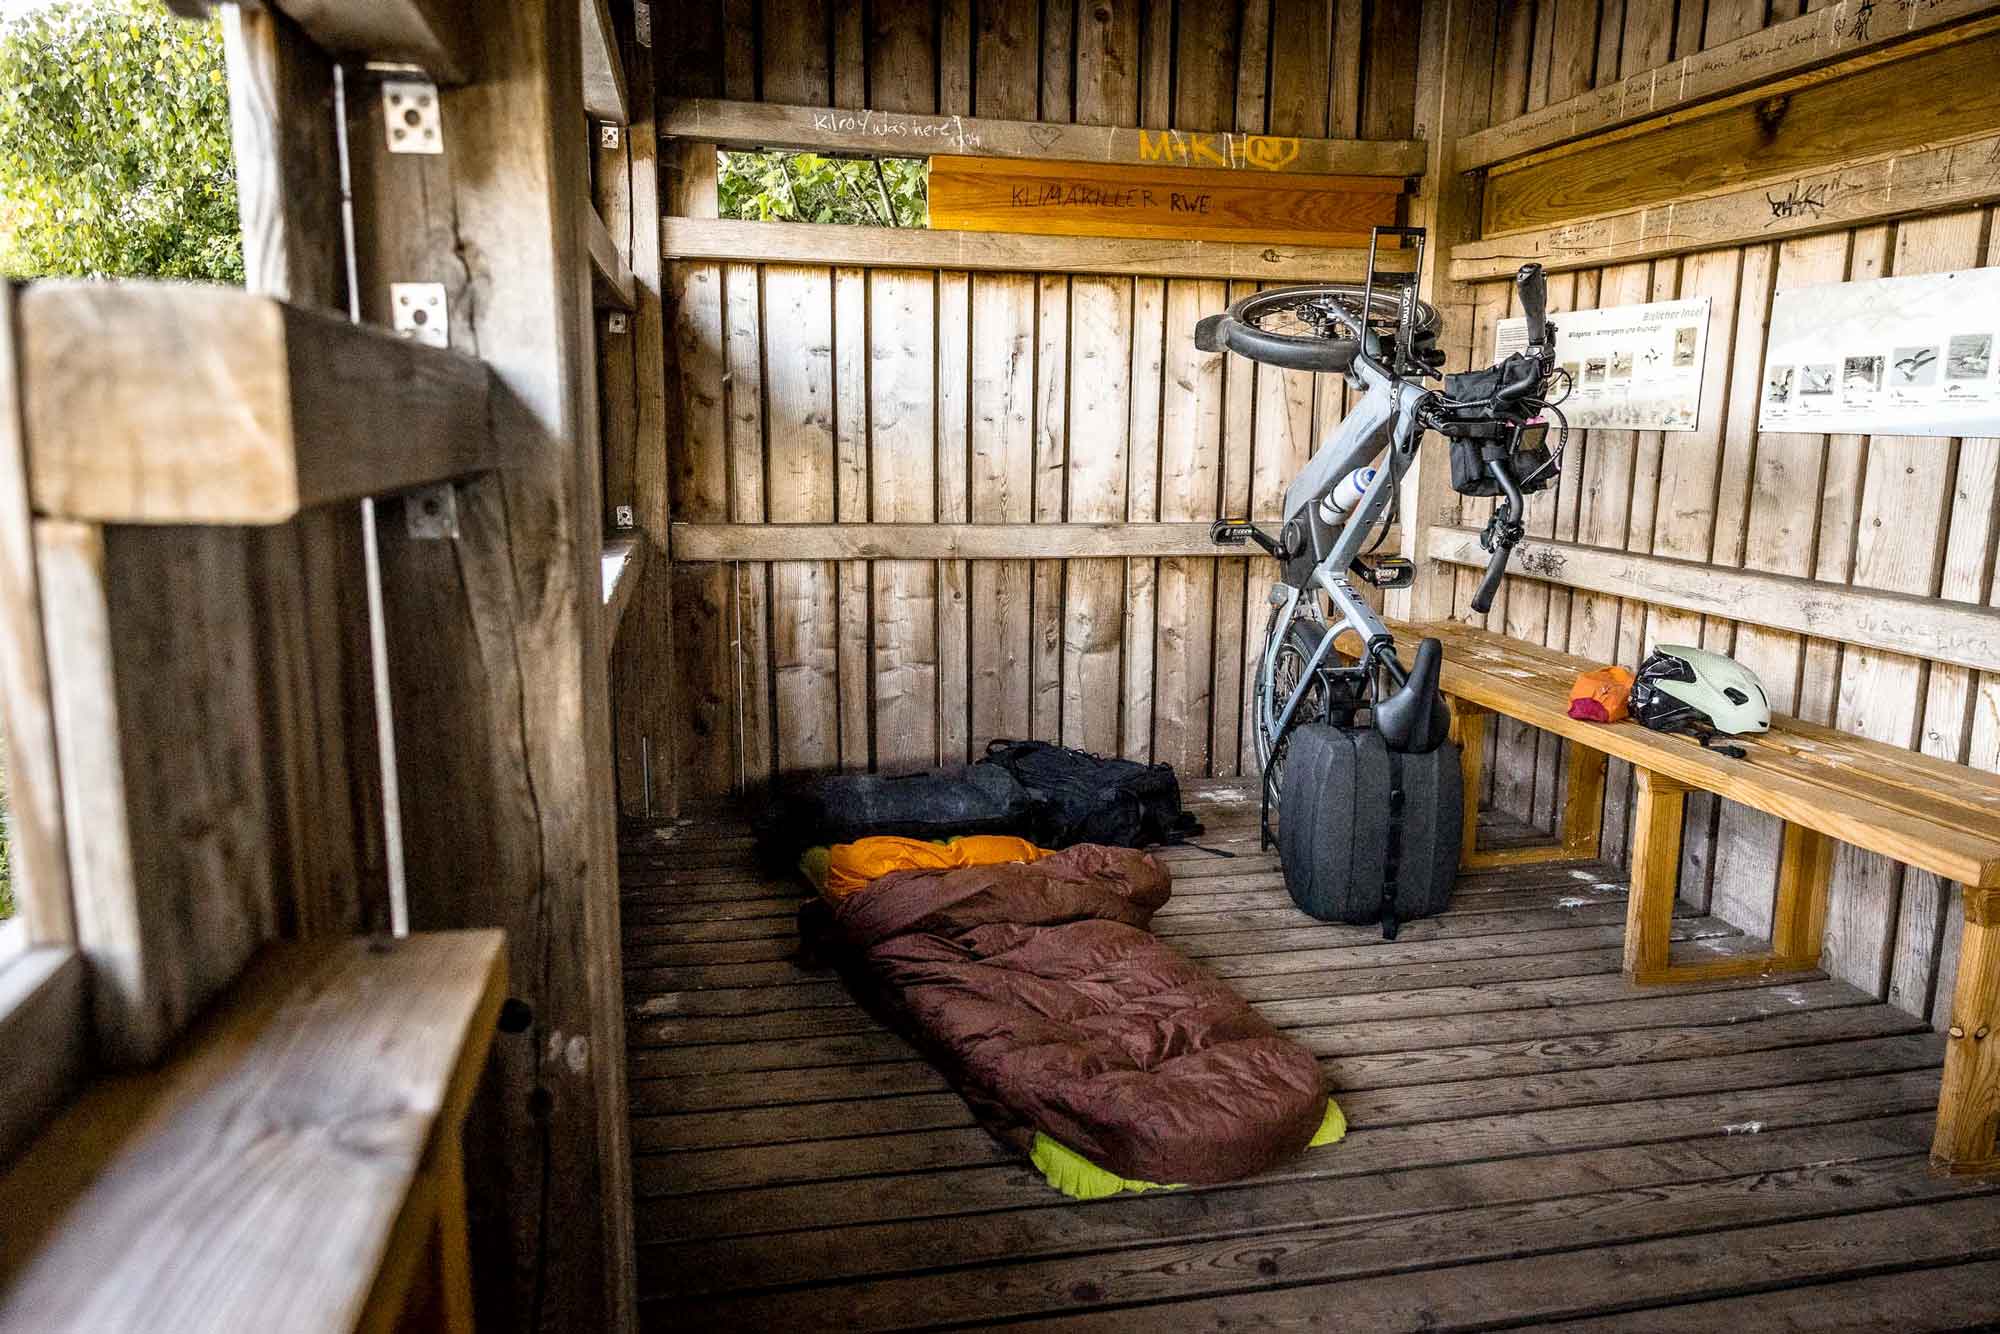 Tidy up the shelter: how good to be able to store the bike upright!